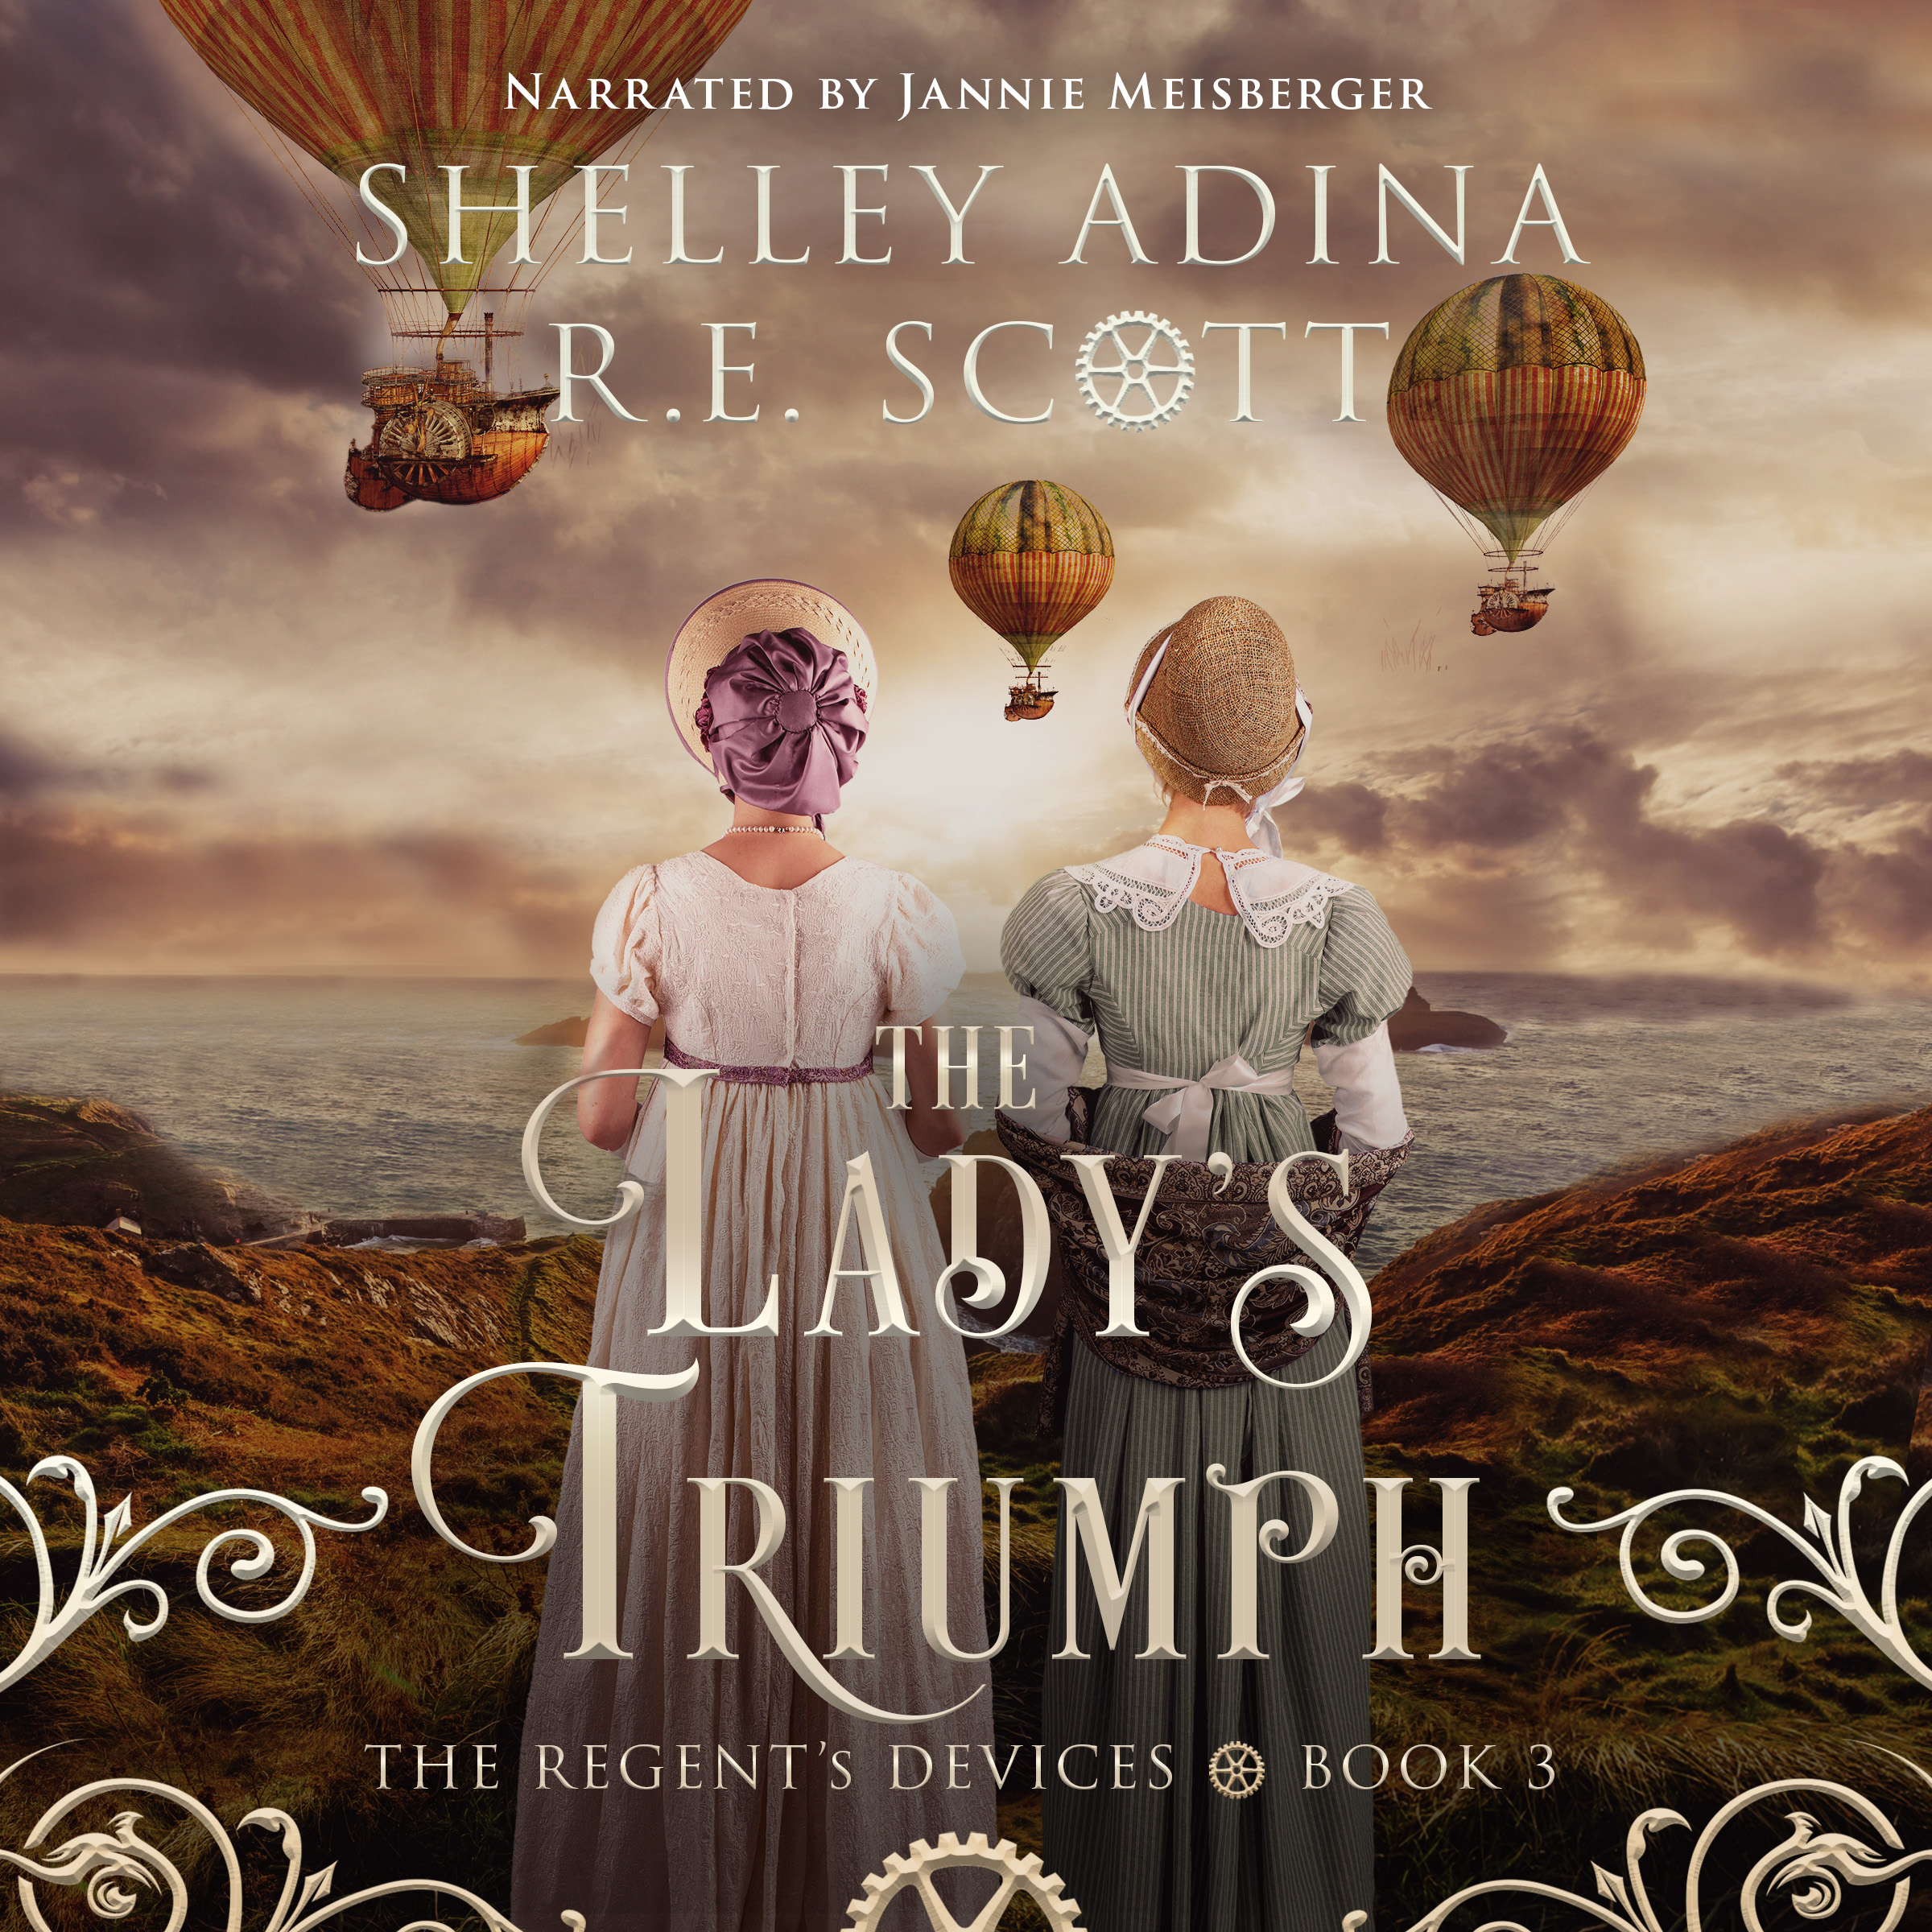 audio book for The Lady's Triumph, book 3 in the Regent's Devices series by Shelley Adina and R.E. Scott